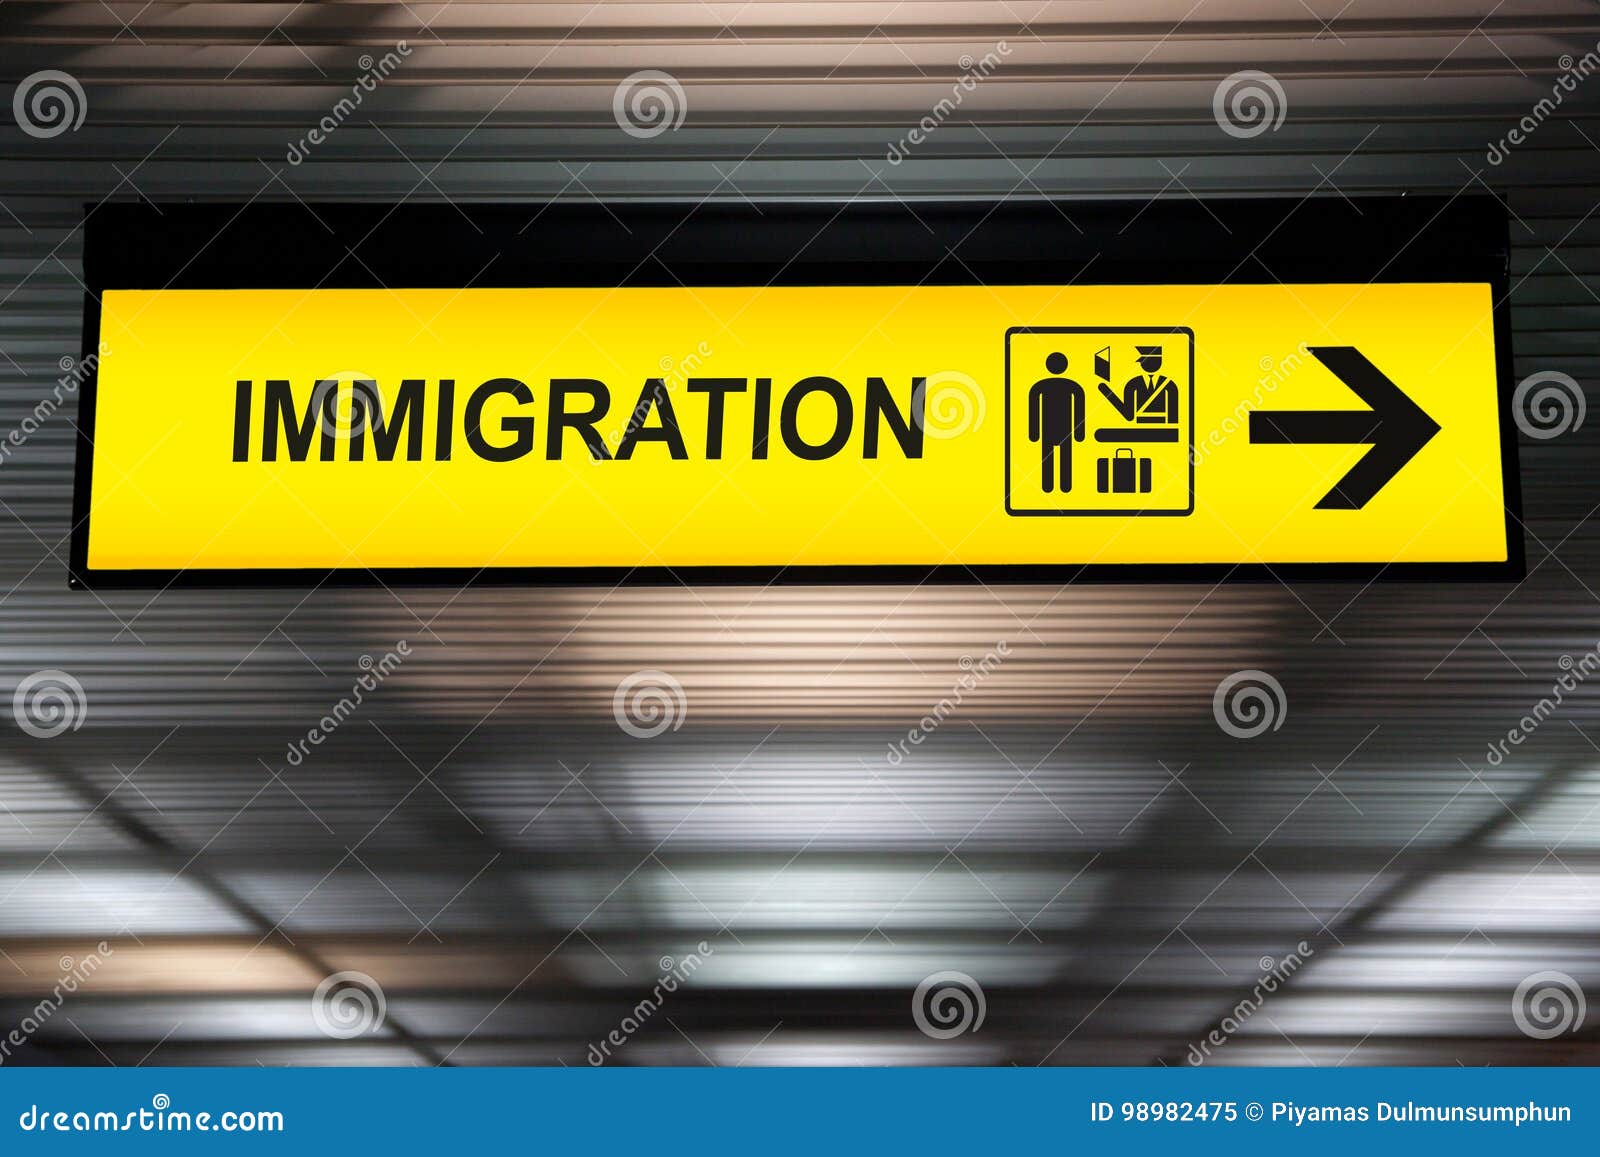 airport immigration and customs sign